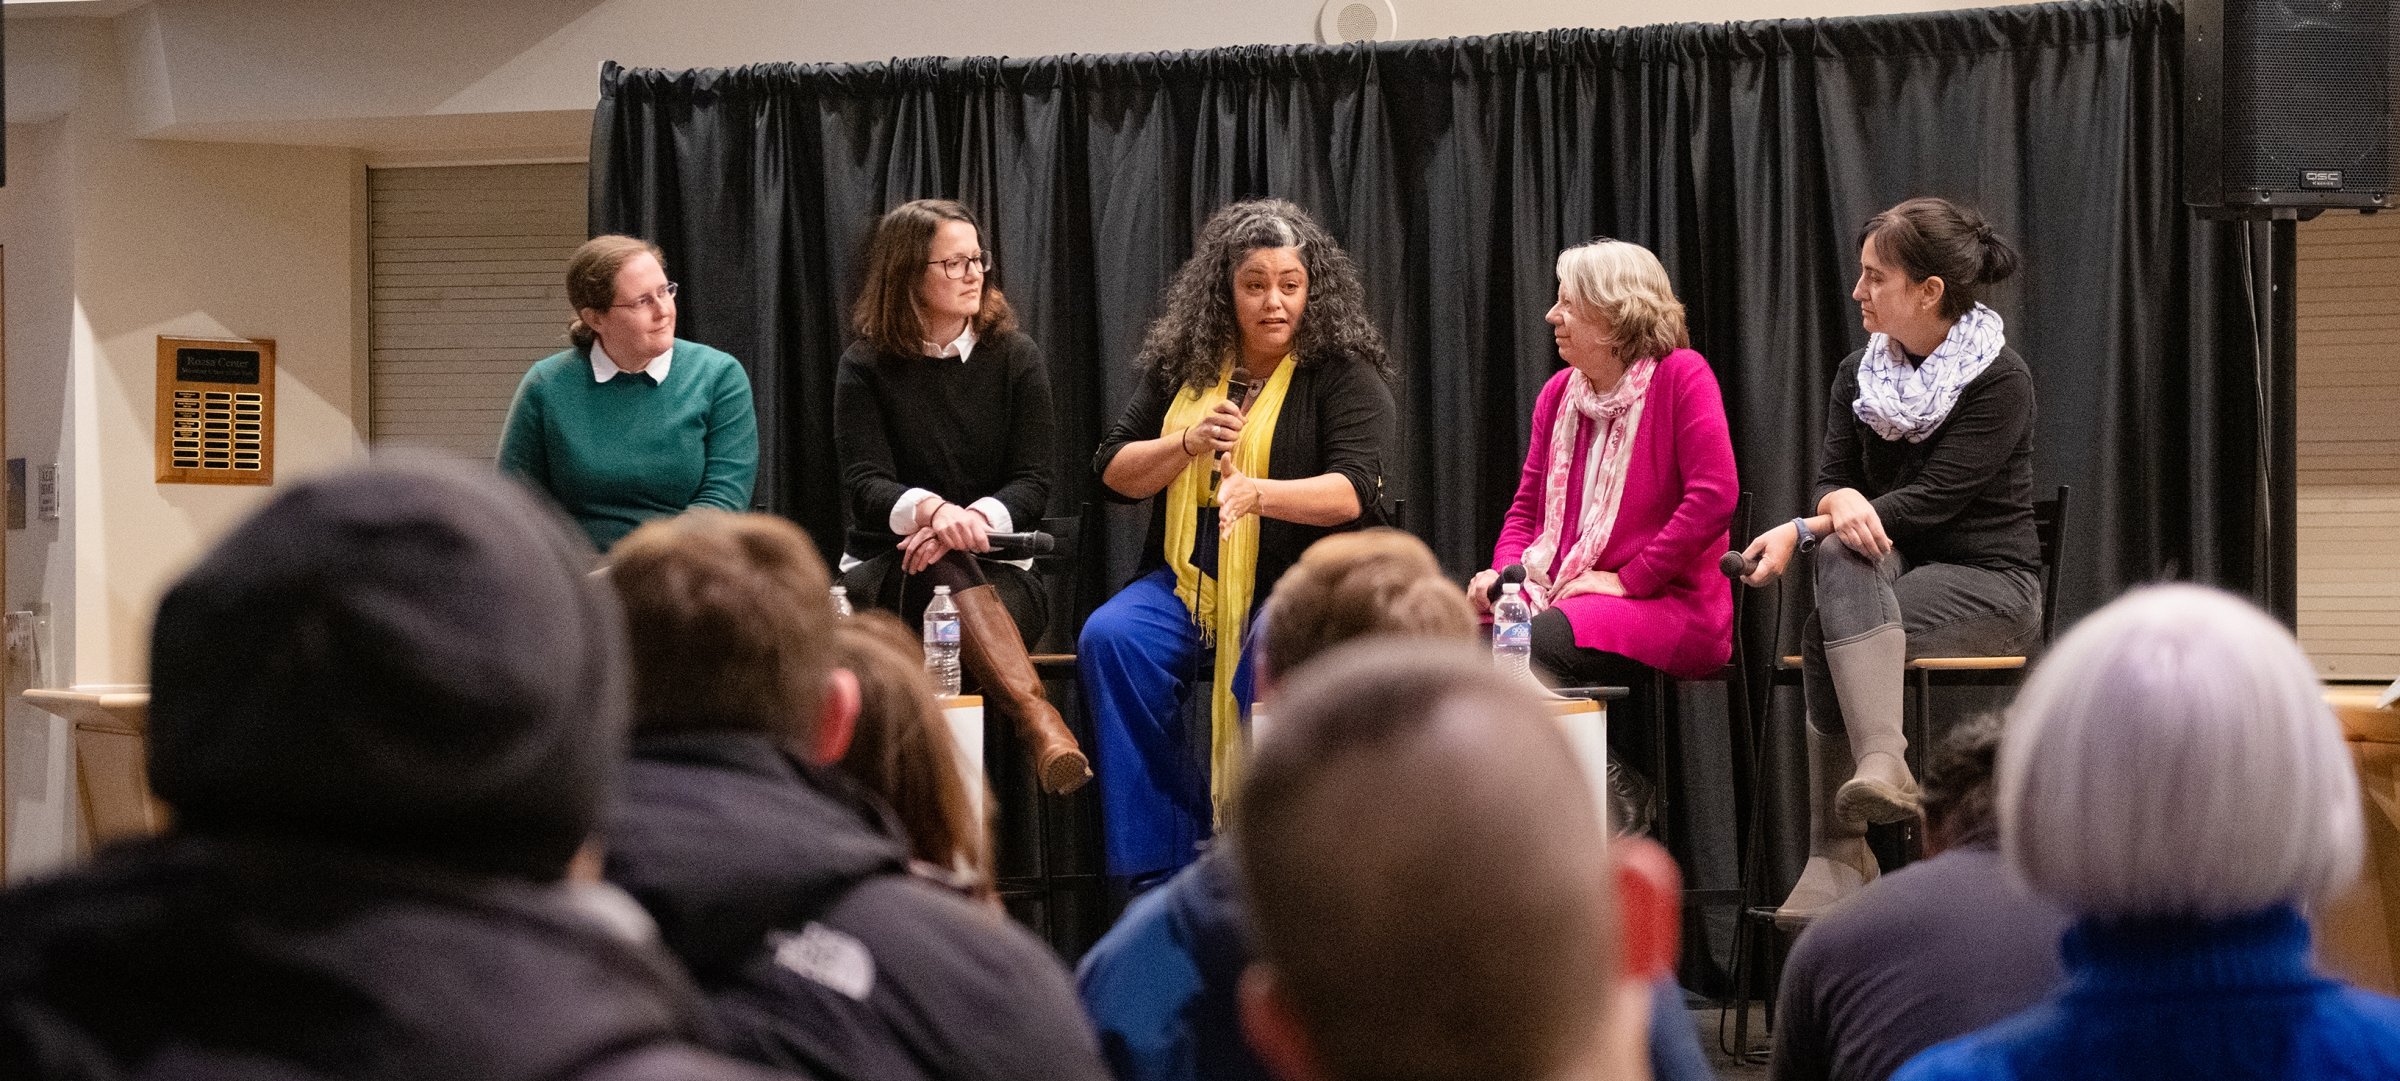 Women in a panel discussion in front of a crowd of people.